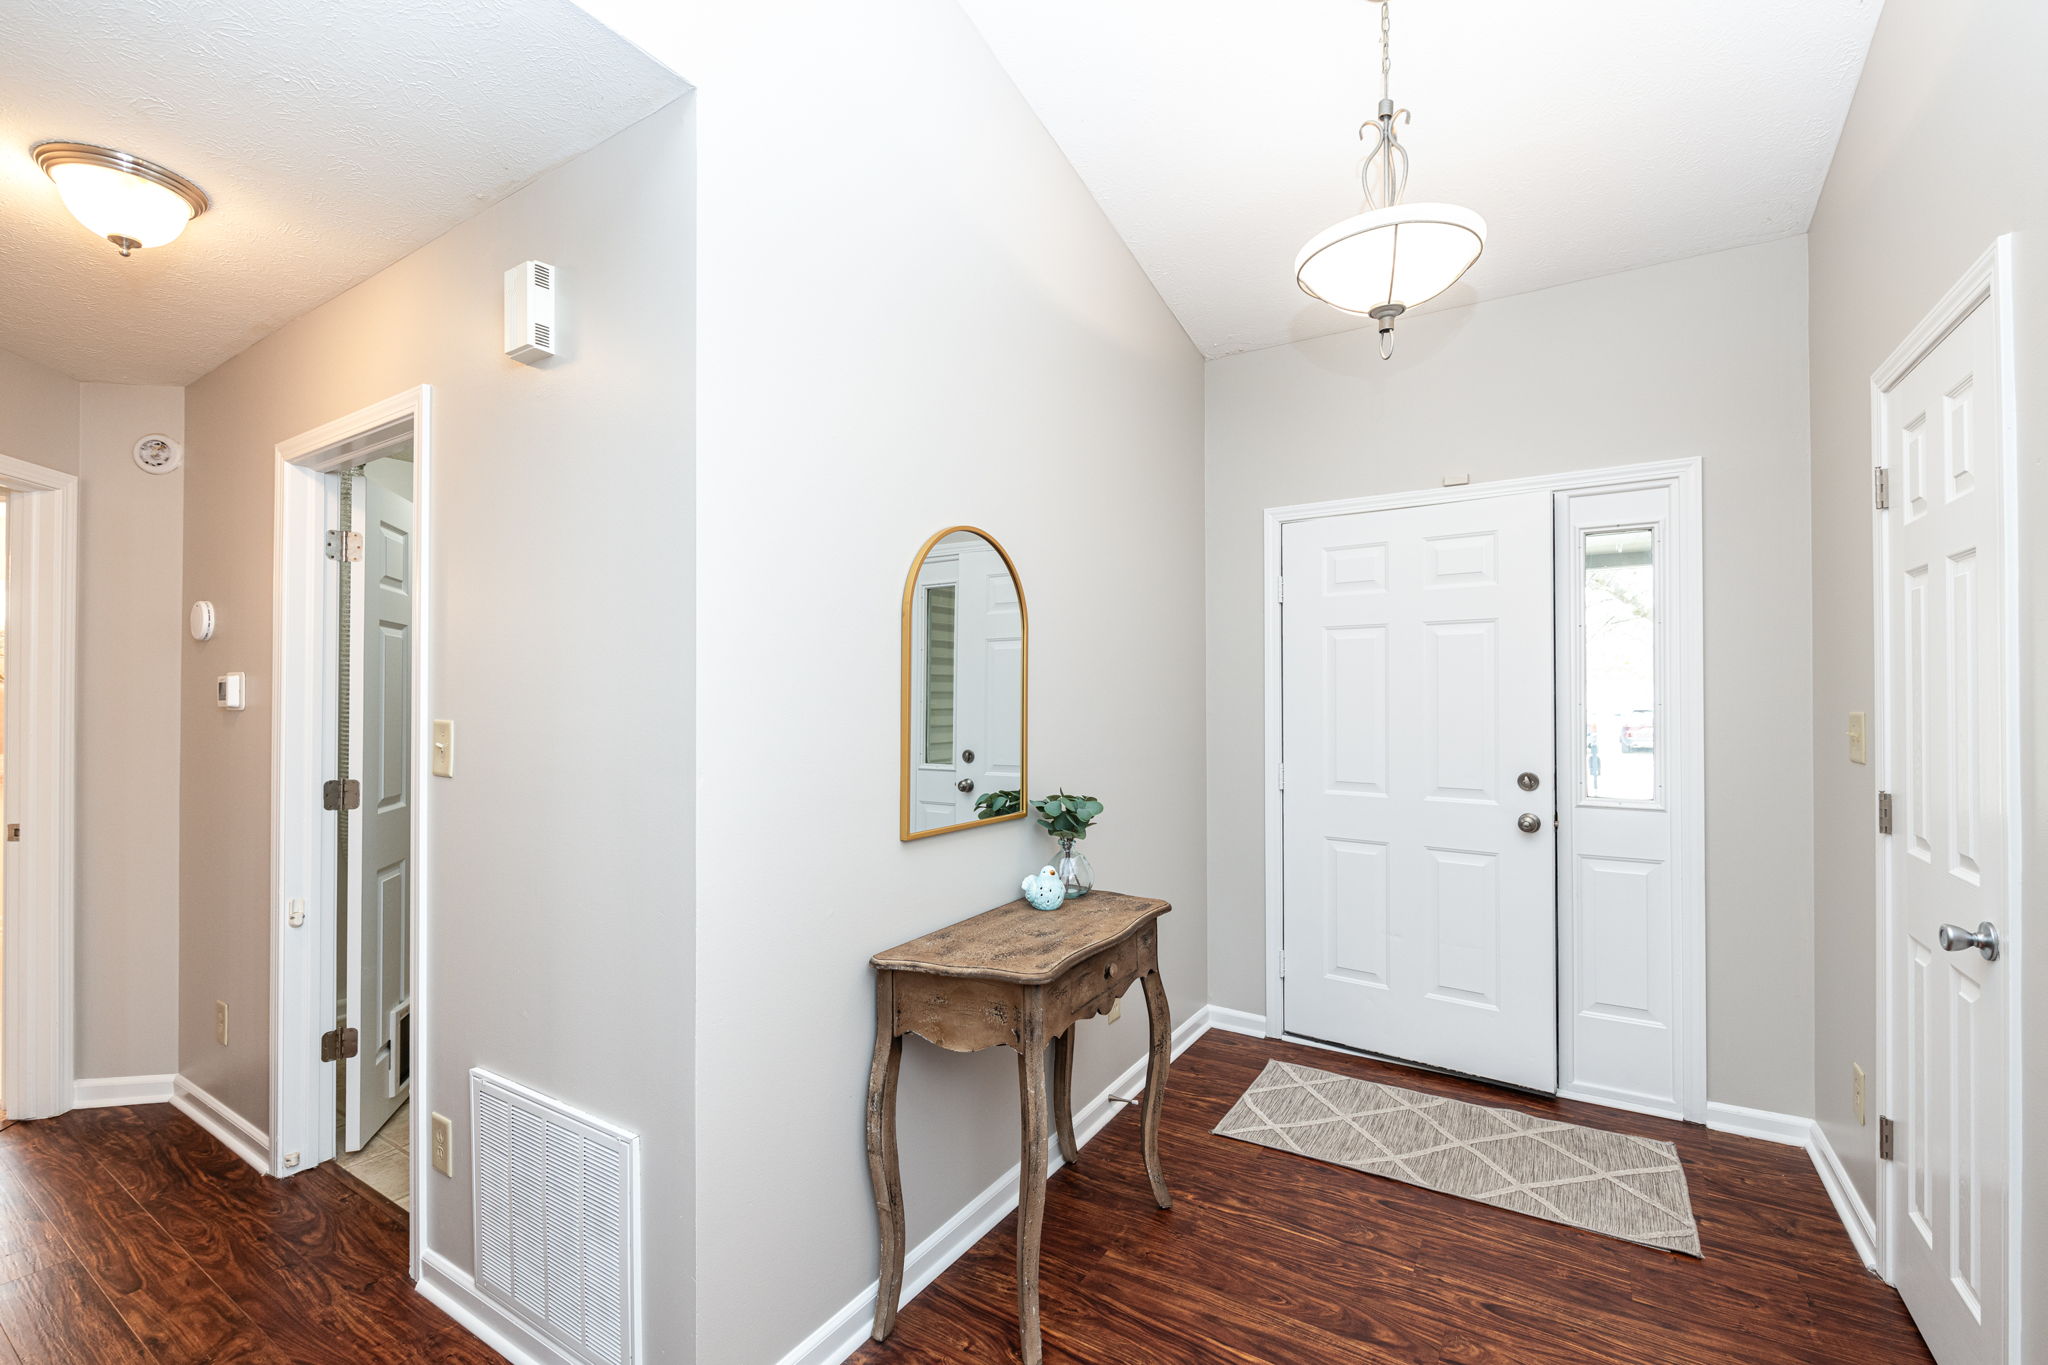 Lovely foyer with chandelier and coat closet welcome you home.